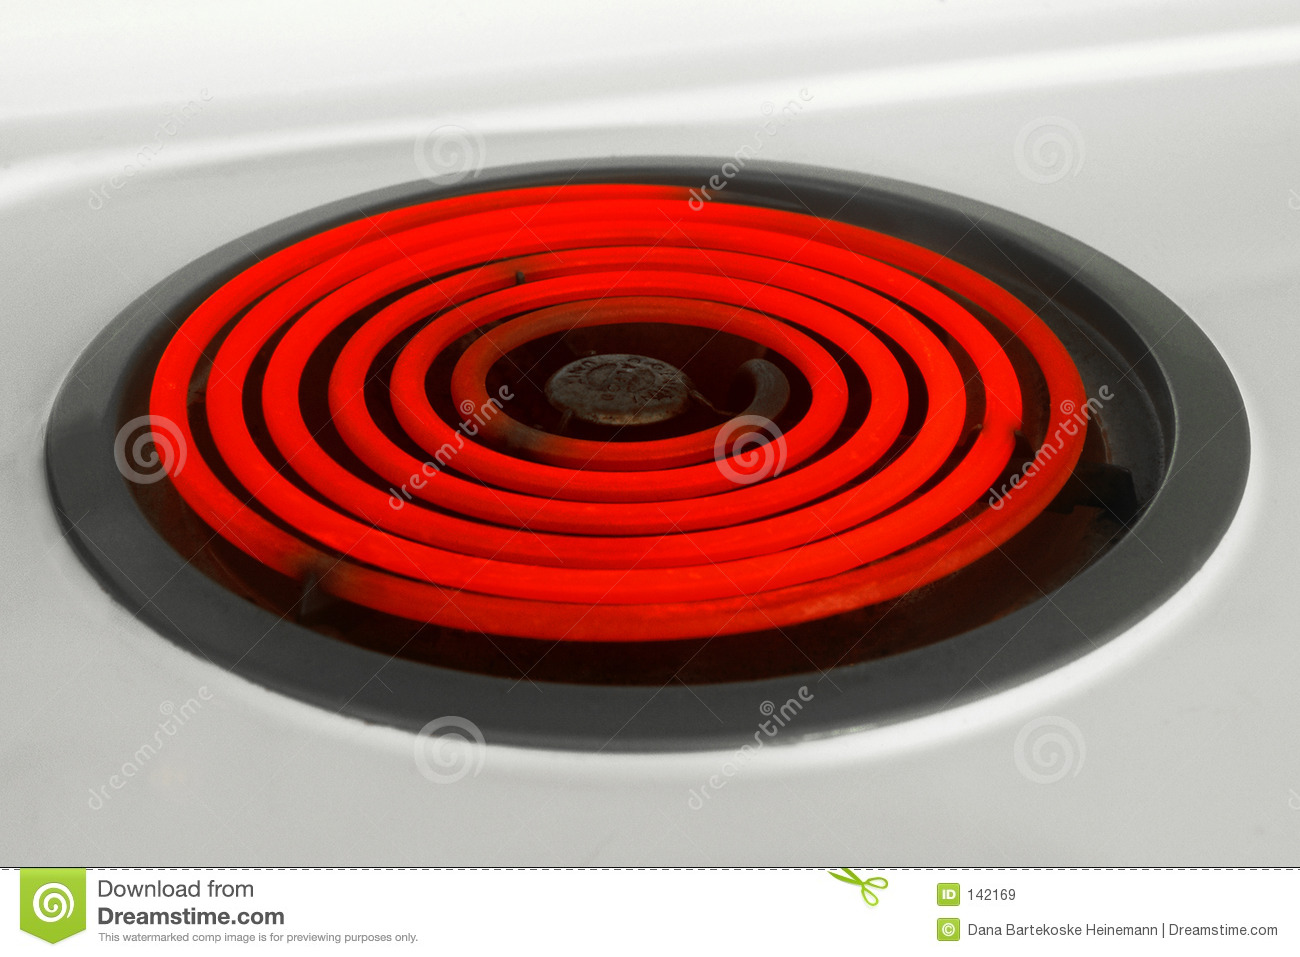 Stove Burner On Electric Stove Red With Heat 